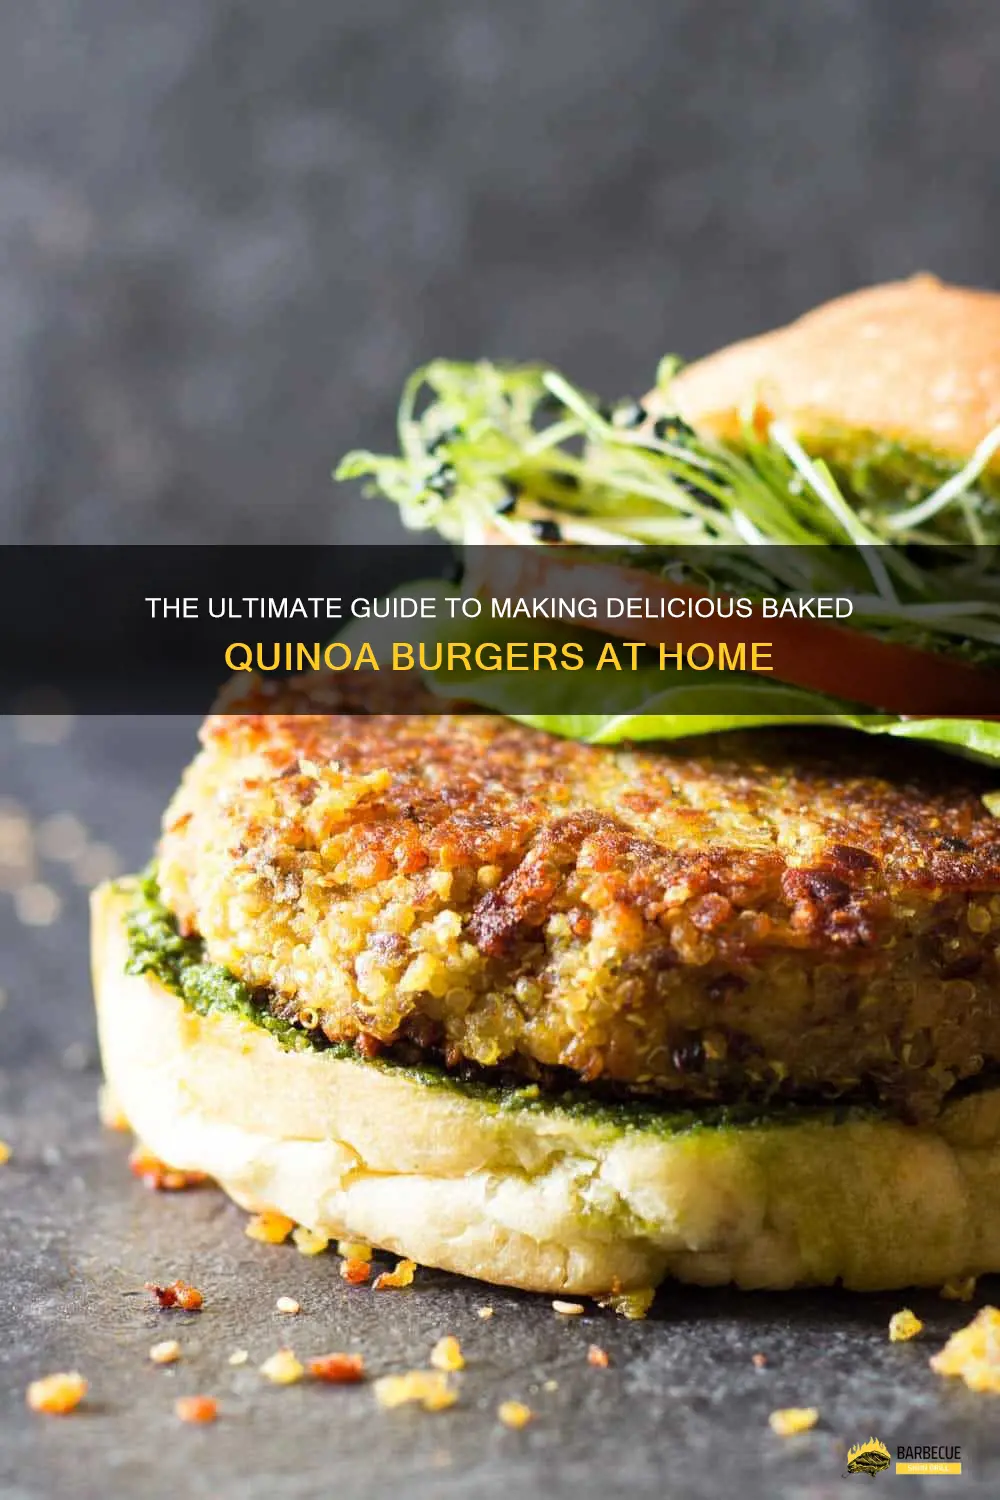 The Ultimate Guide To Making Delicious Baked Quinoa Burgers At Home ...